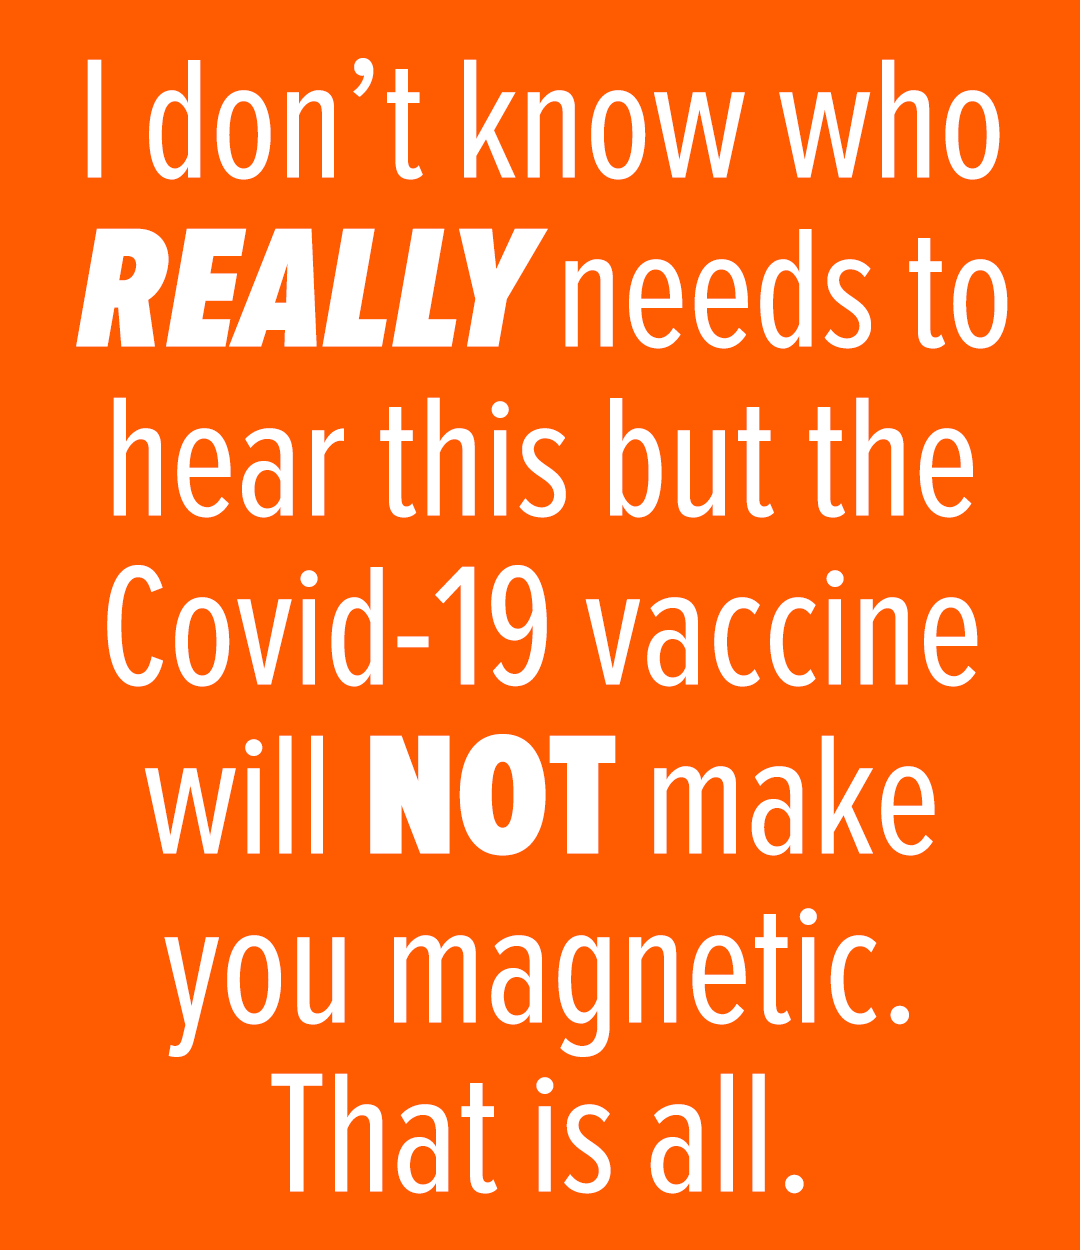 Bright orange meme with white text reading, "I don't know how REALLY needs to hear this but the COVID-19 vaccine will NOT make you magnetic. That is all."